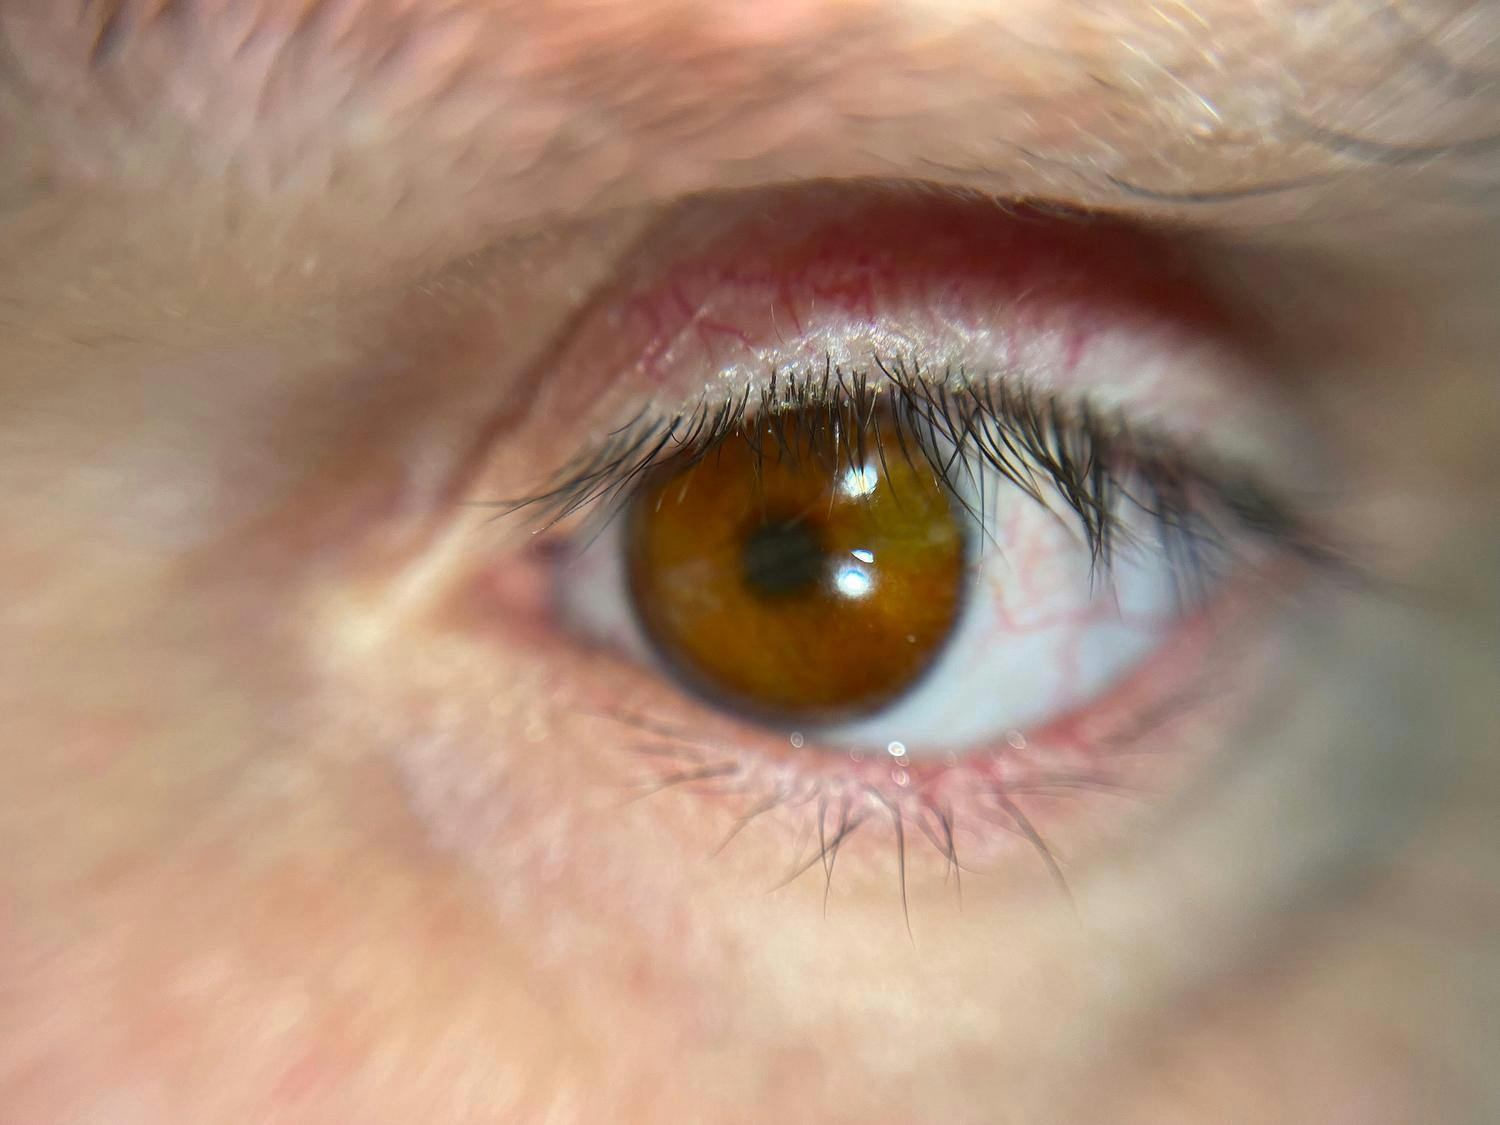 3D-printed prosthetic eye successfully created by Fraunhofer Institute